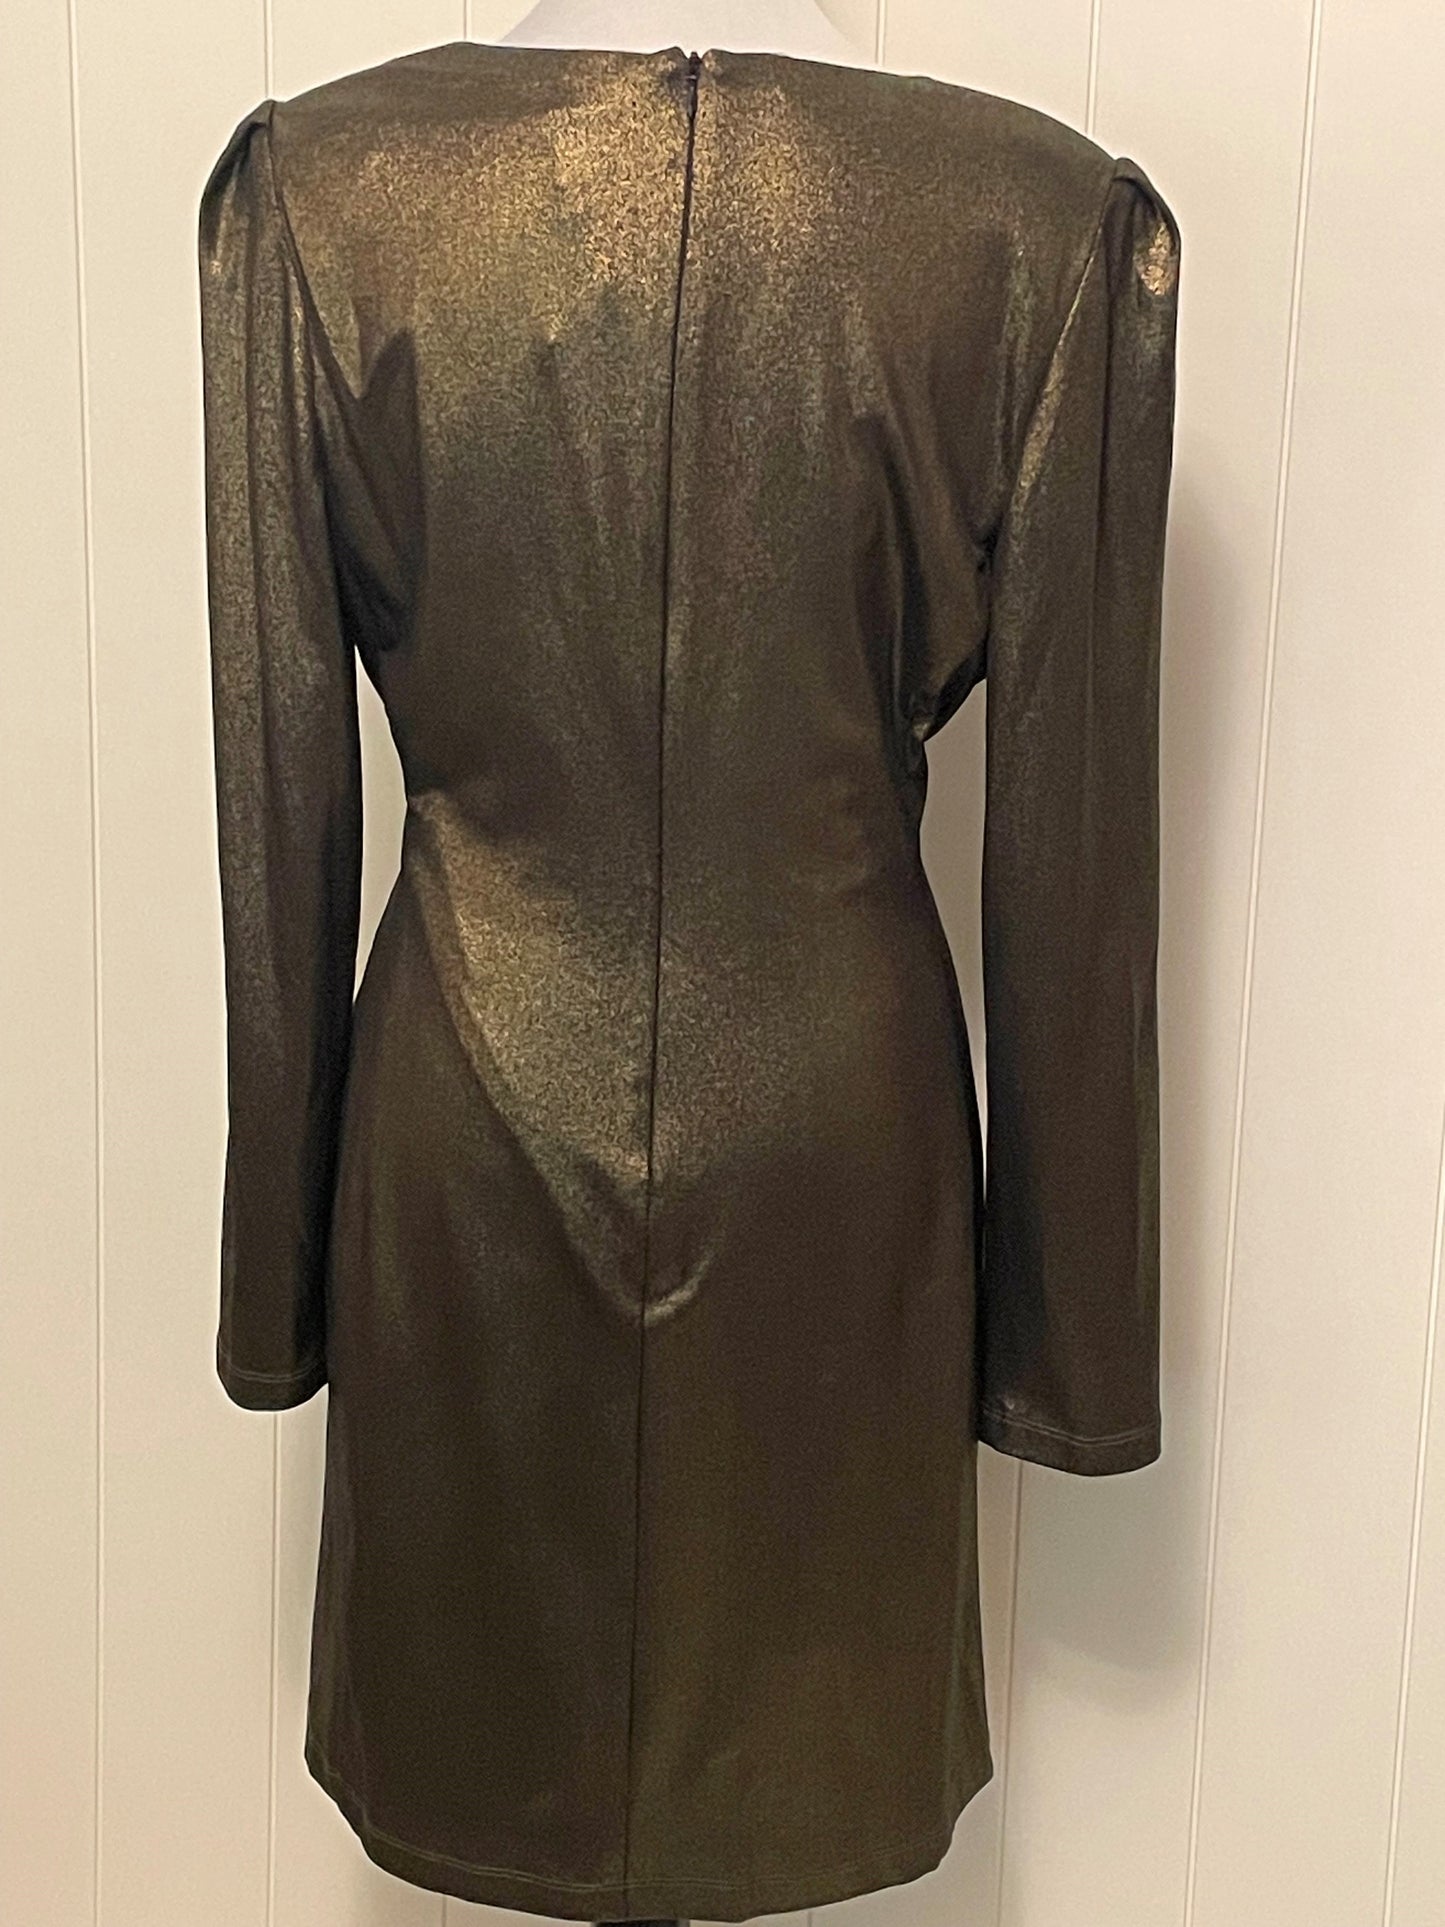 Size 10 - NWT Taylor gold dress